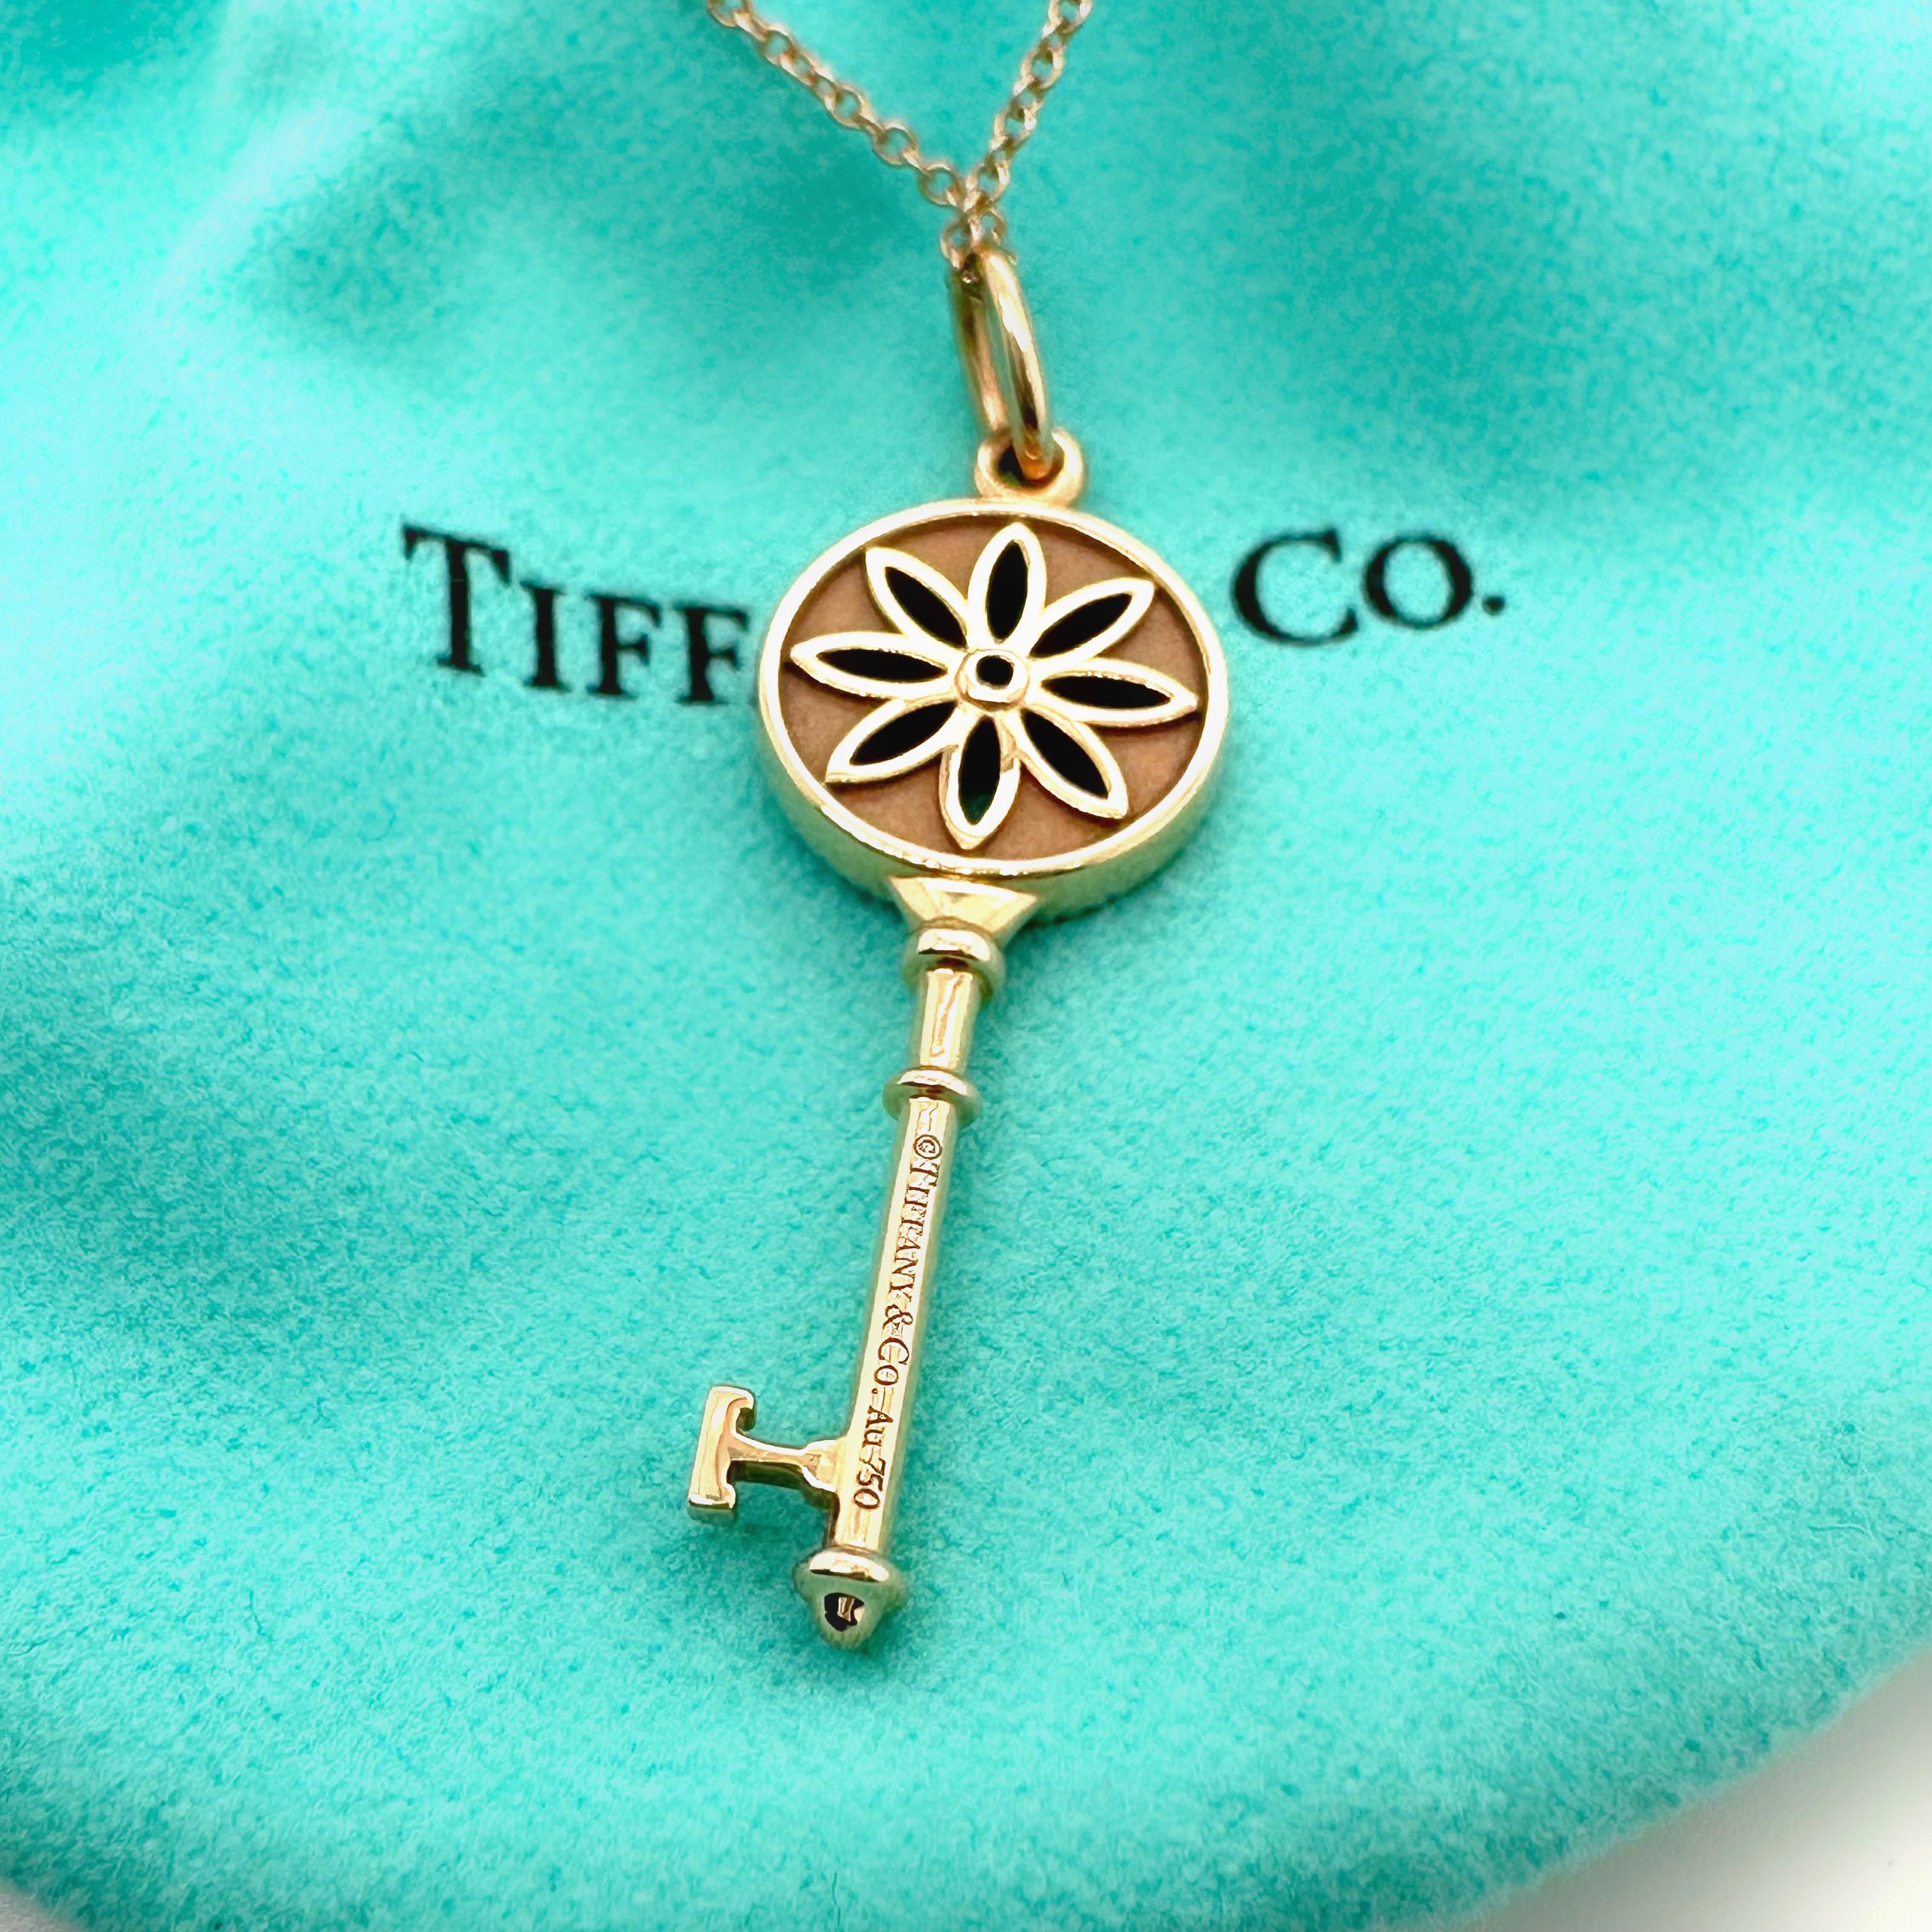 Tiffany & Co. Daisy Key Diamond Pendant Necklace 18kt Rose Gold In Good Condition For Sale In San Diego, CA